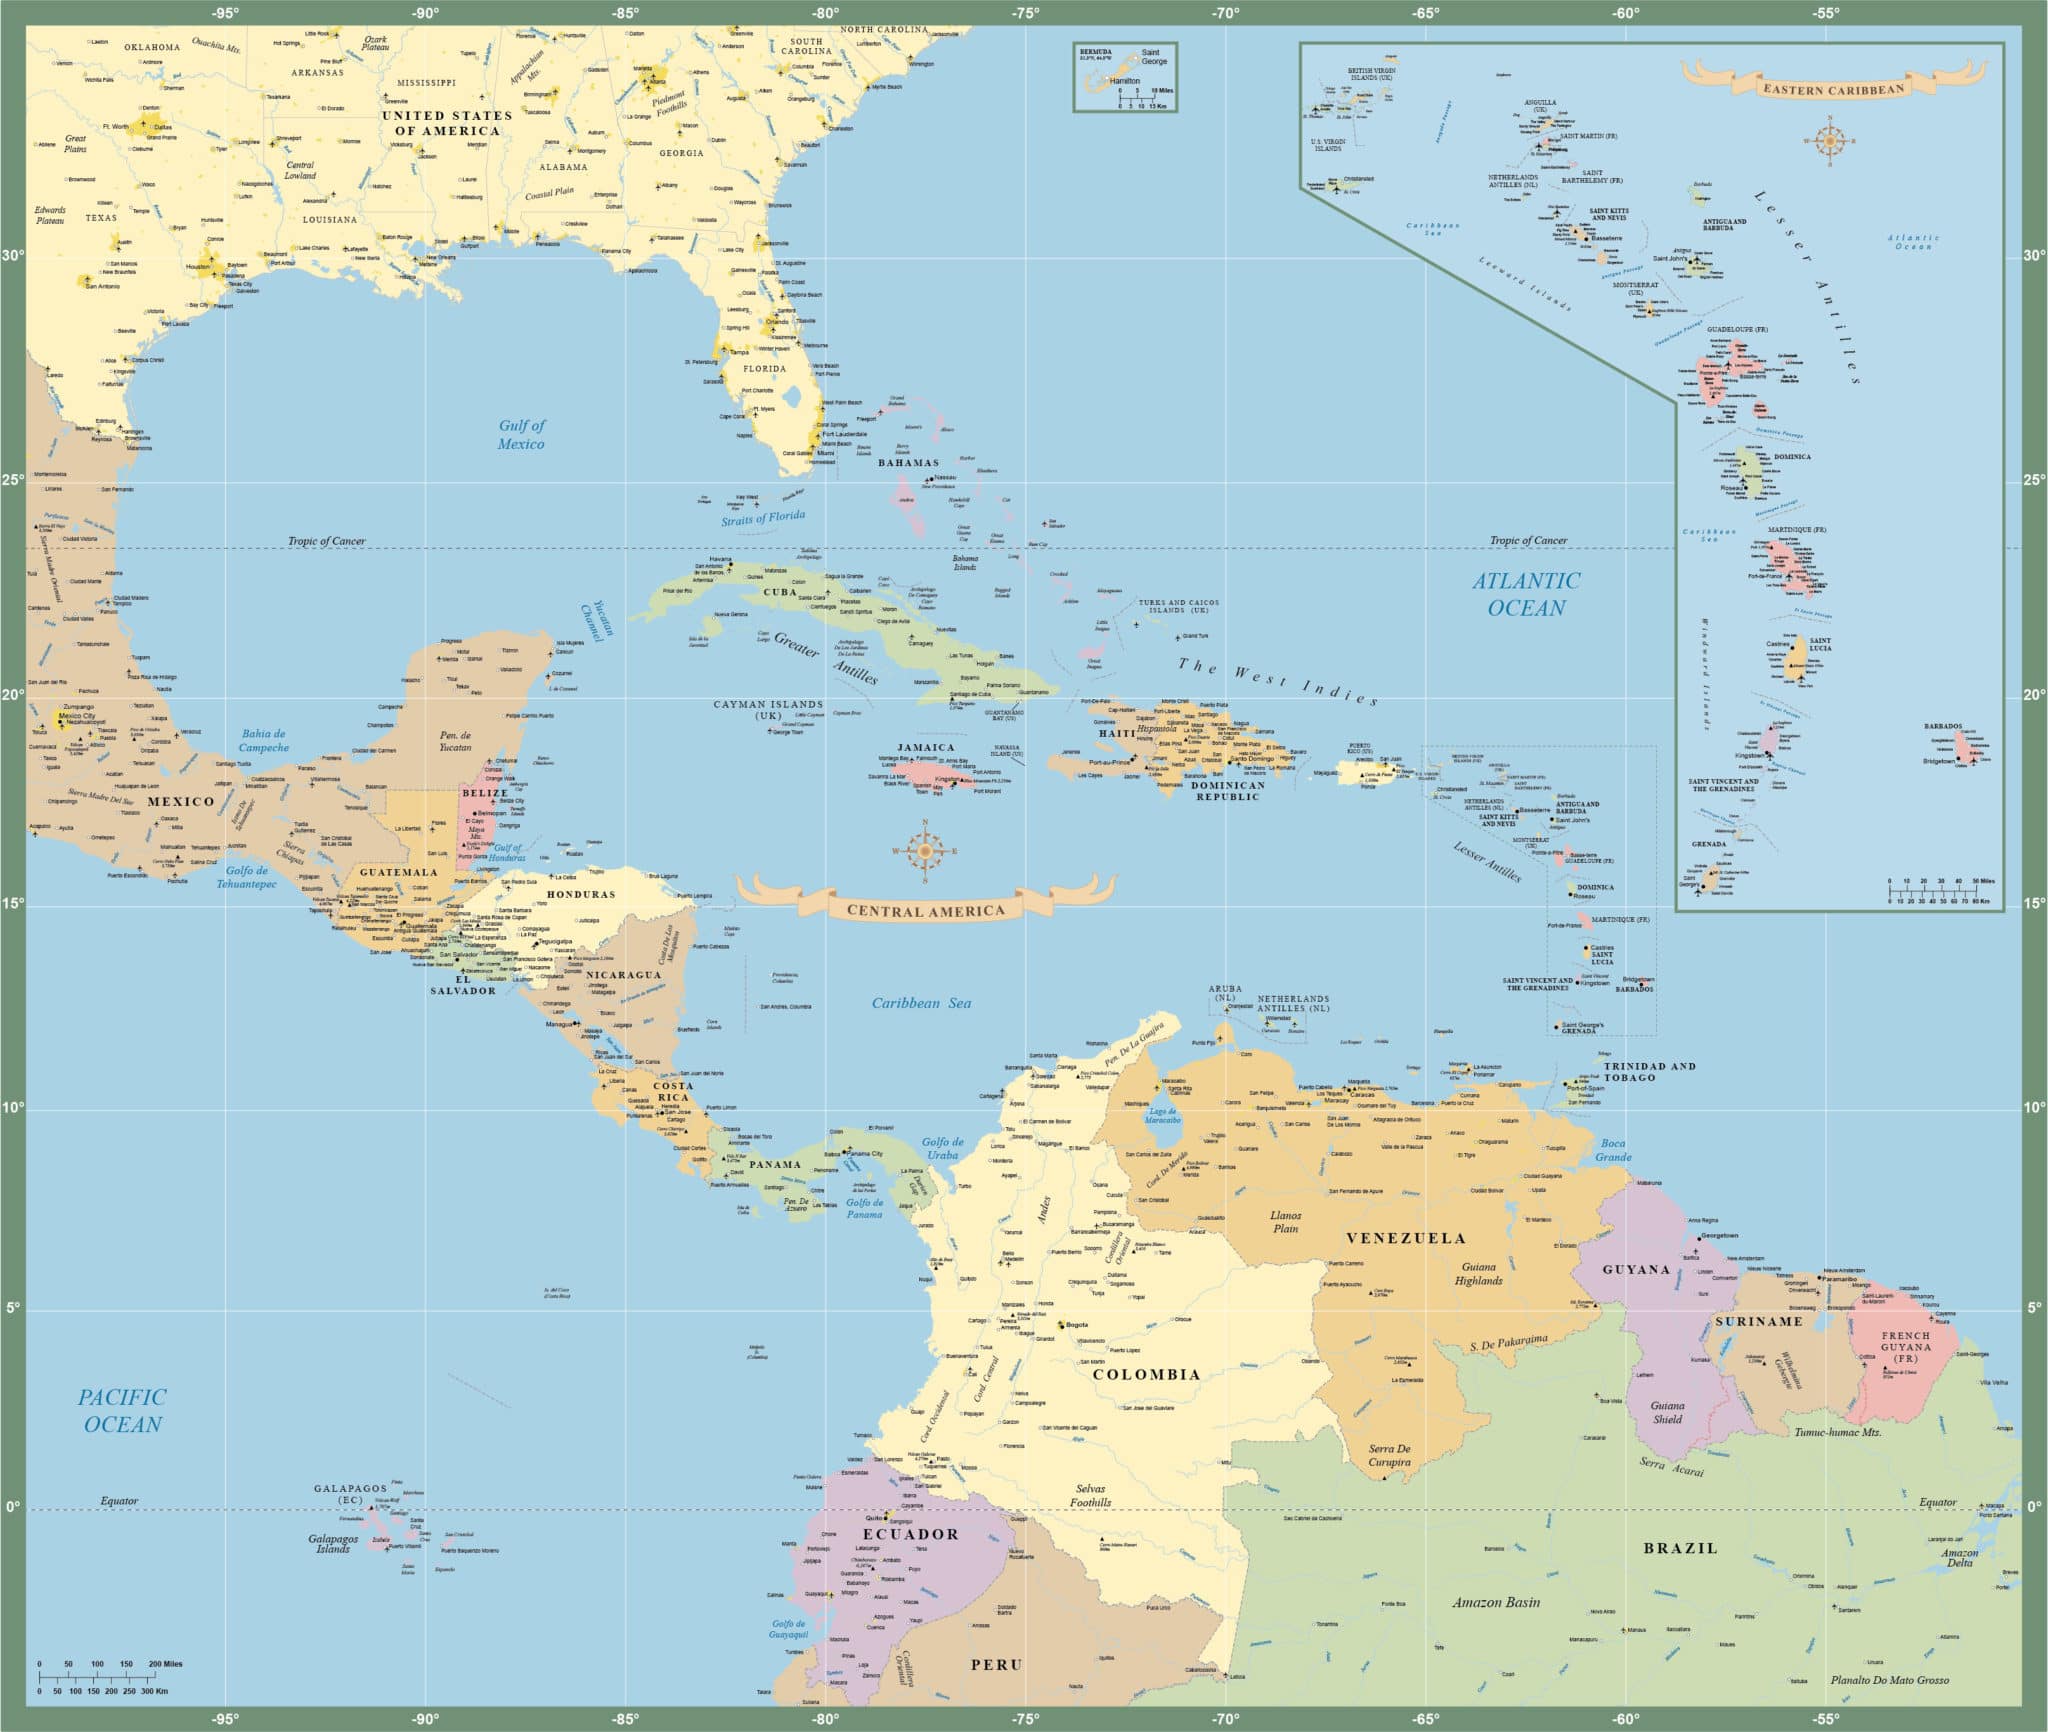 All 100+ Images map of the caribbean and central america Latest